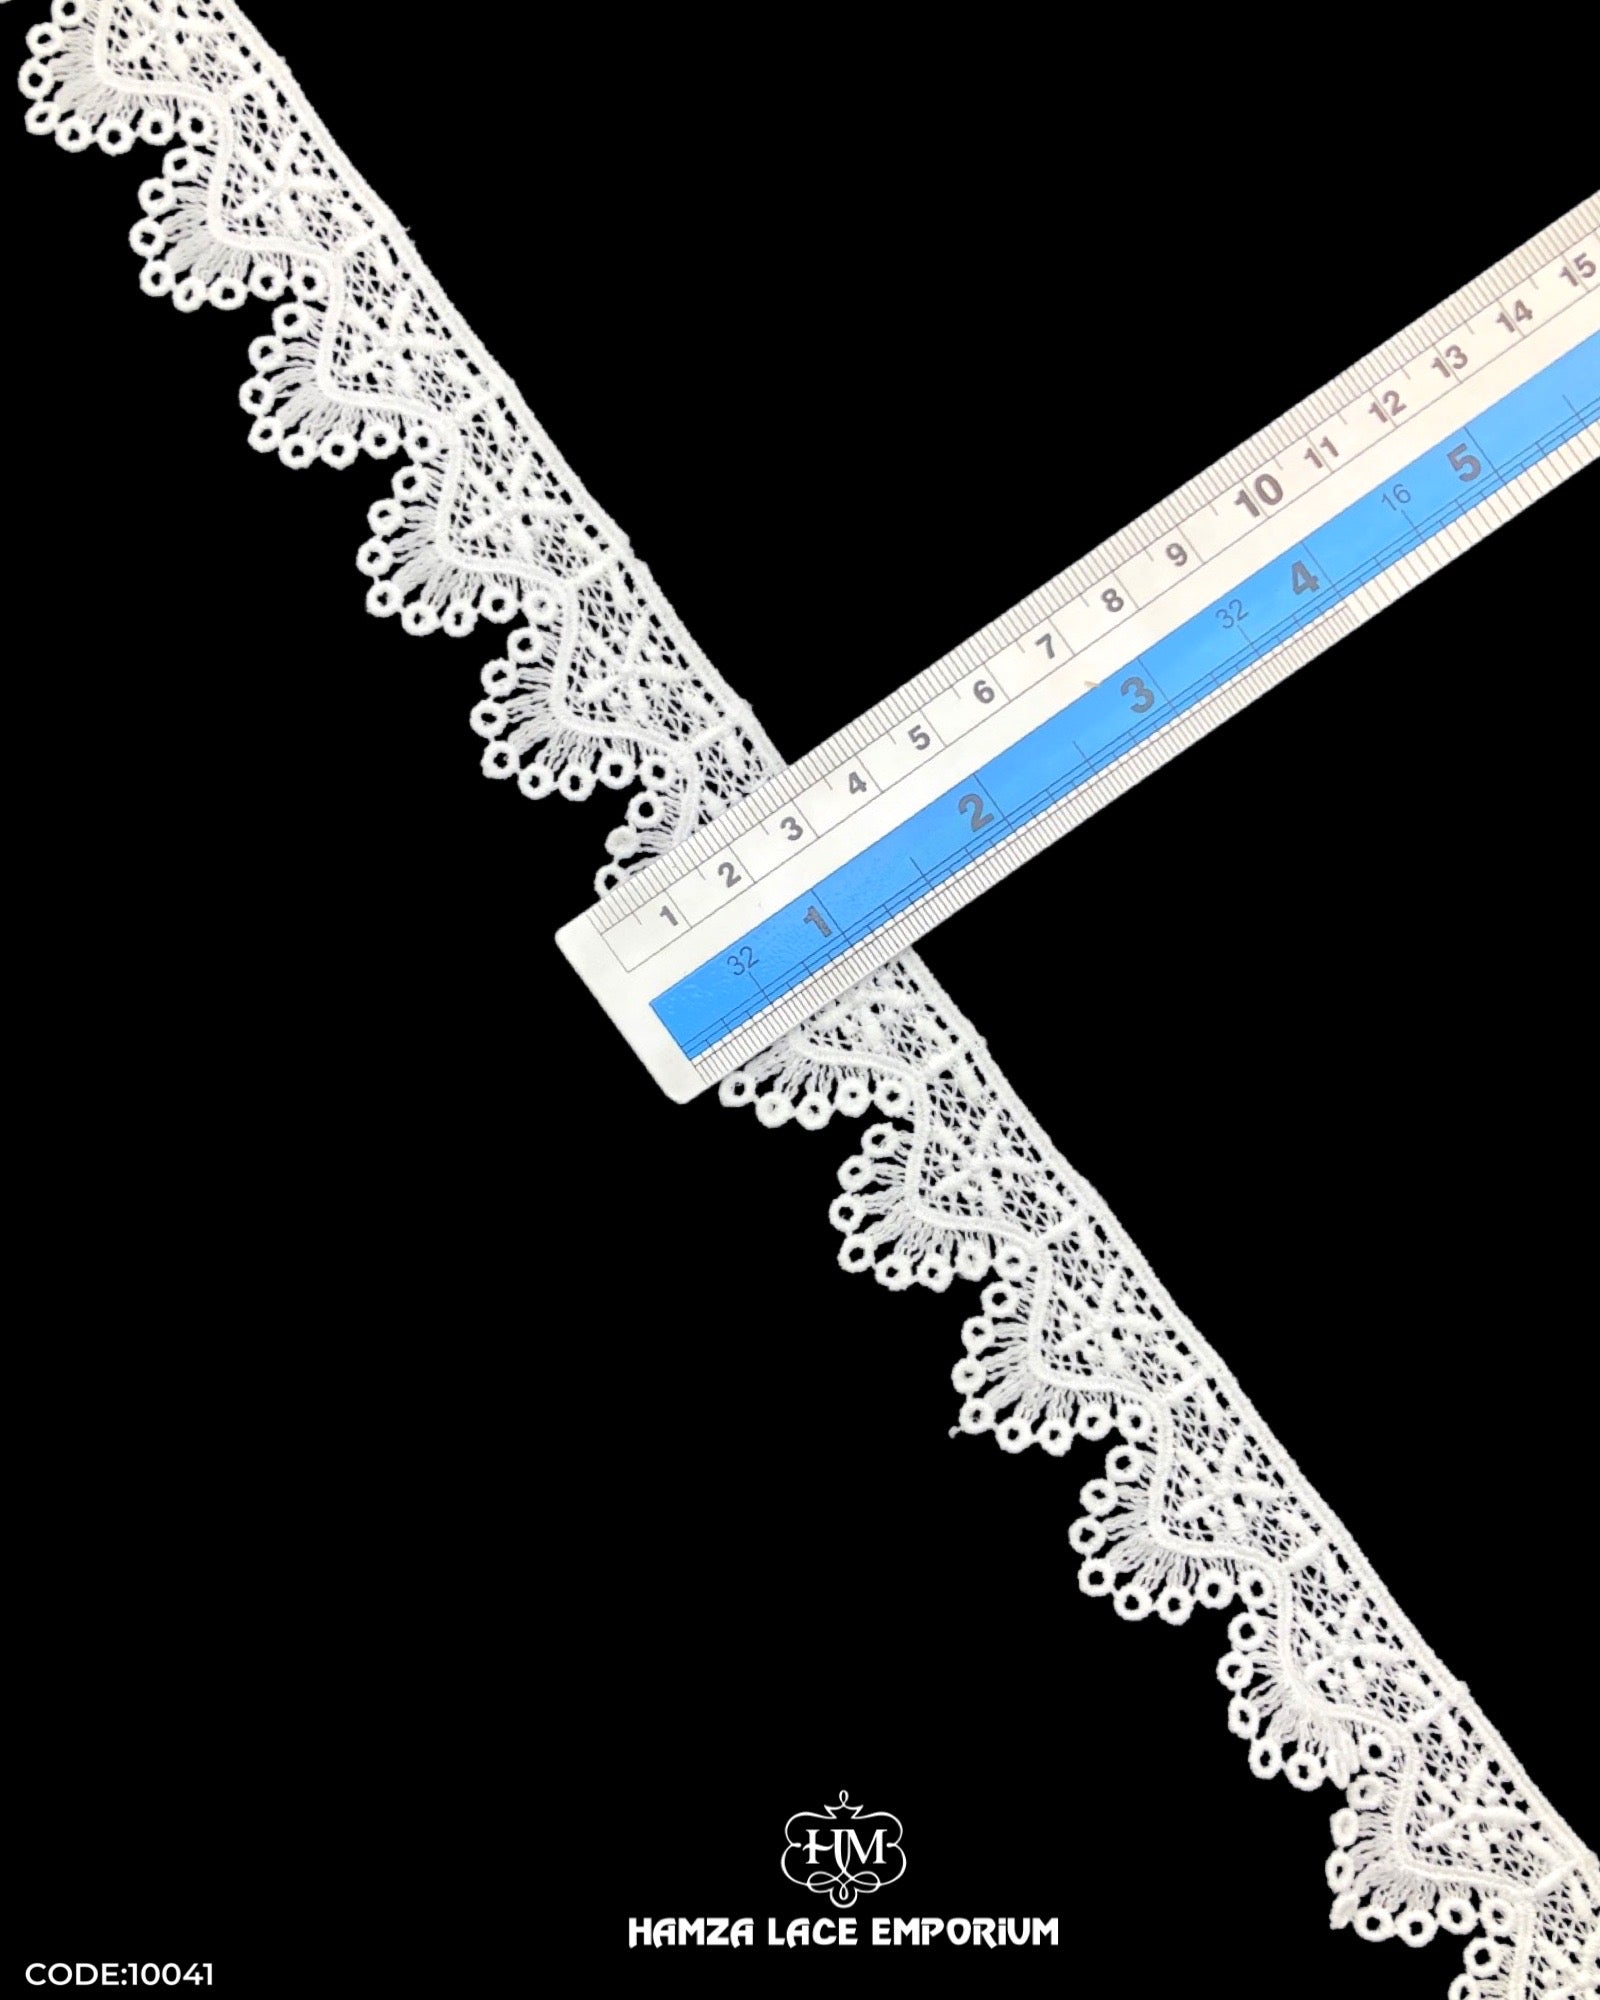 Size of the 'Edging Scallop Lace 10041' is shown as '1.25' inches with the help of a ruler